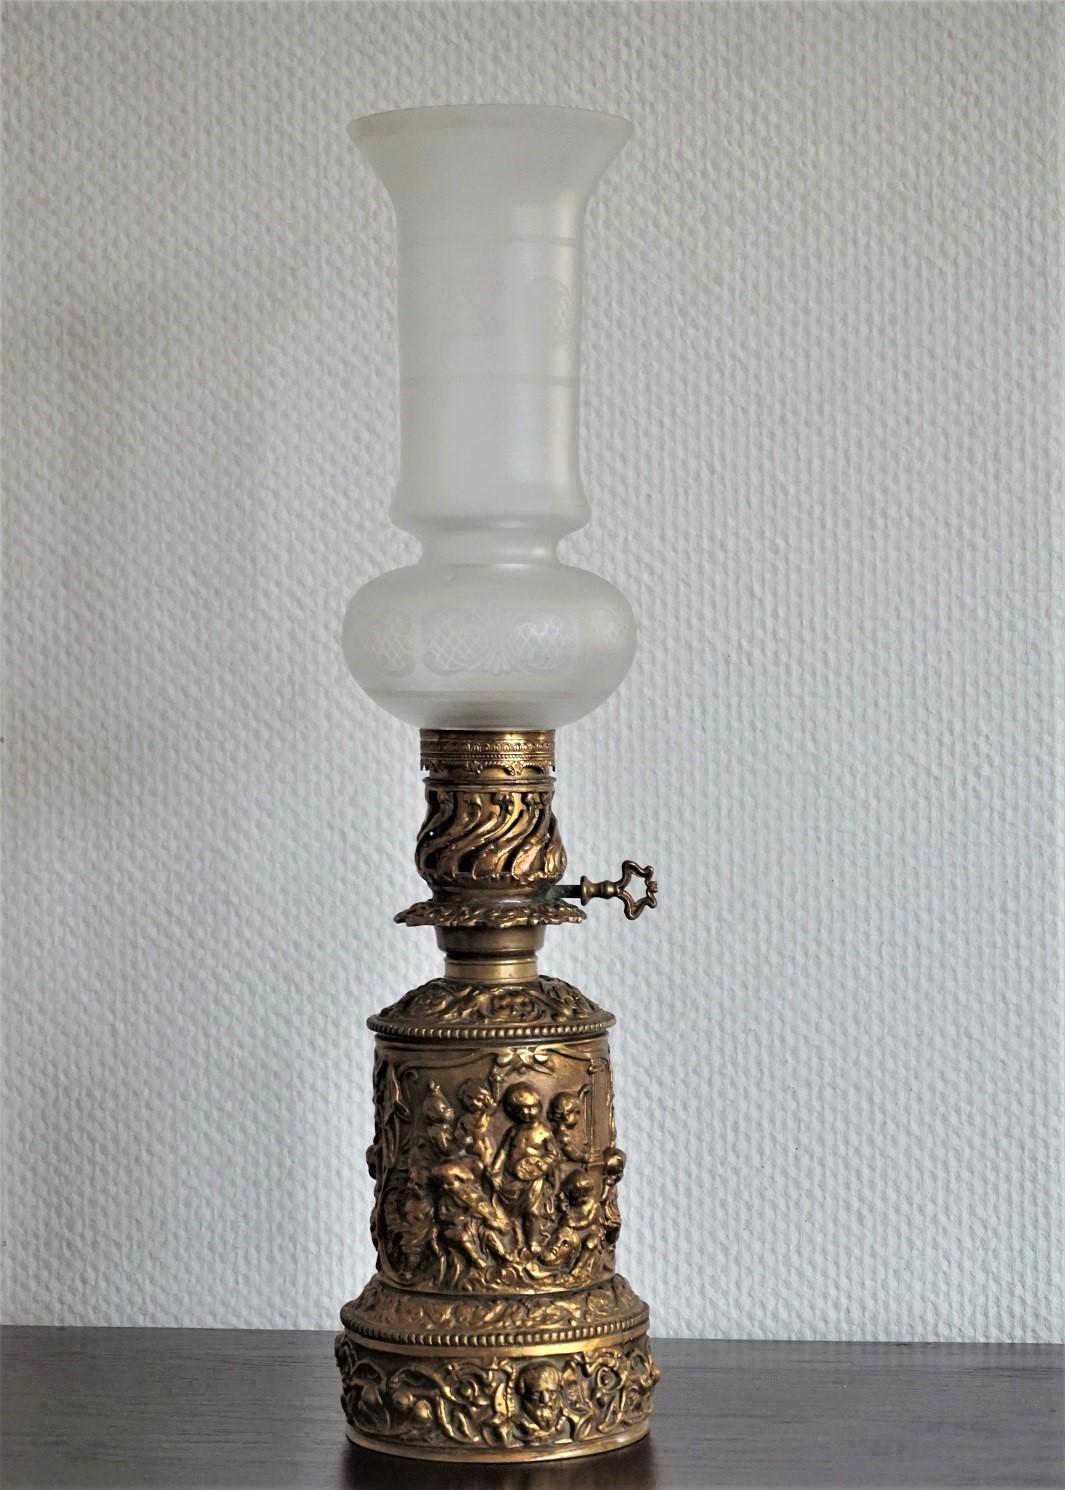 A high quality Victorian oil lamp of solid gilt bronze in high relief with tall etched glass shade, circa 1870-1890. This lamp has been converted to electric in the early 1930s.
One E14 light bulb socket
Dimensions:
Total height 22.50 in (57